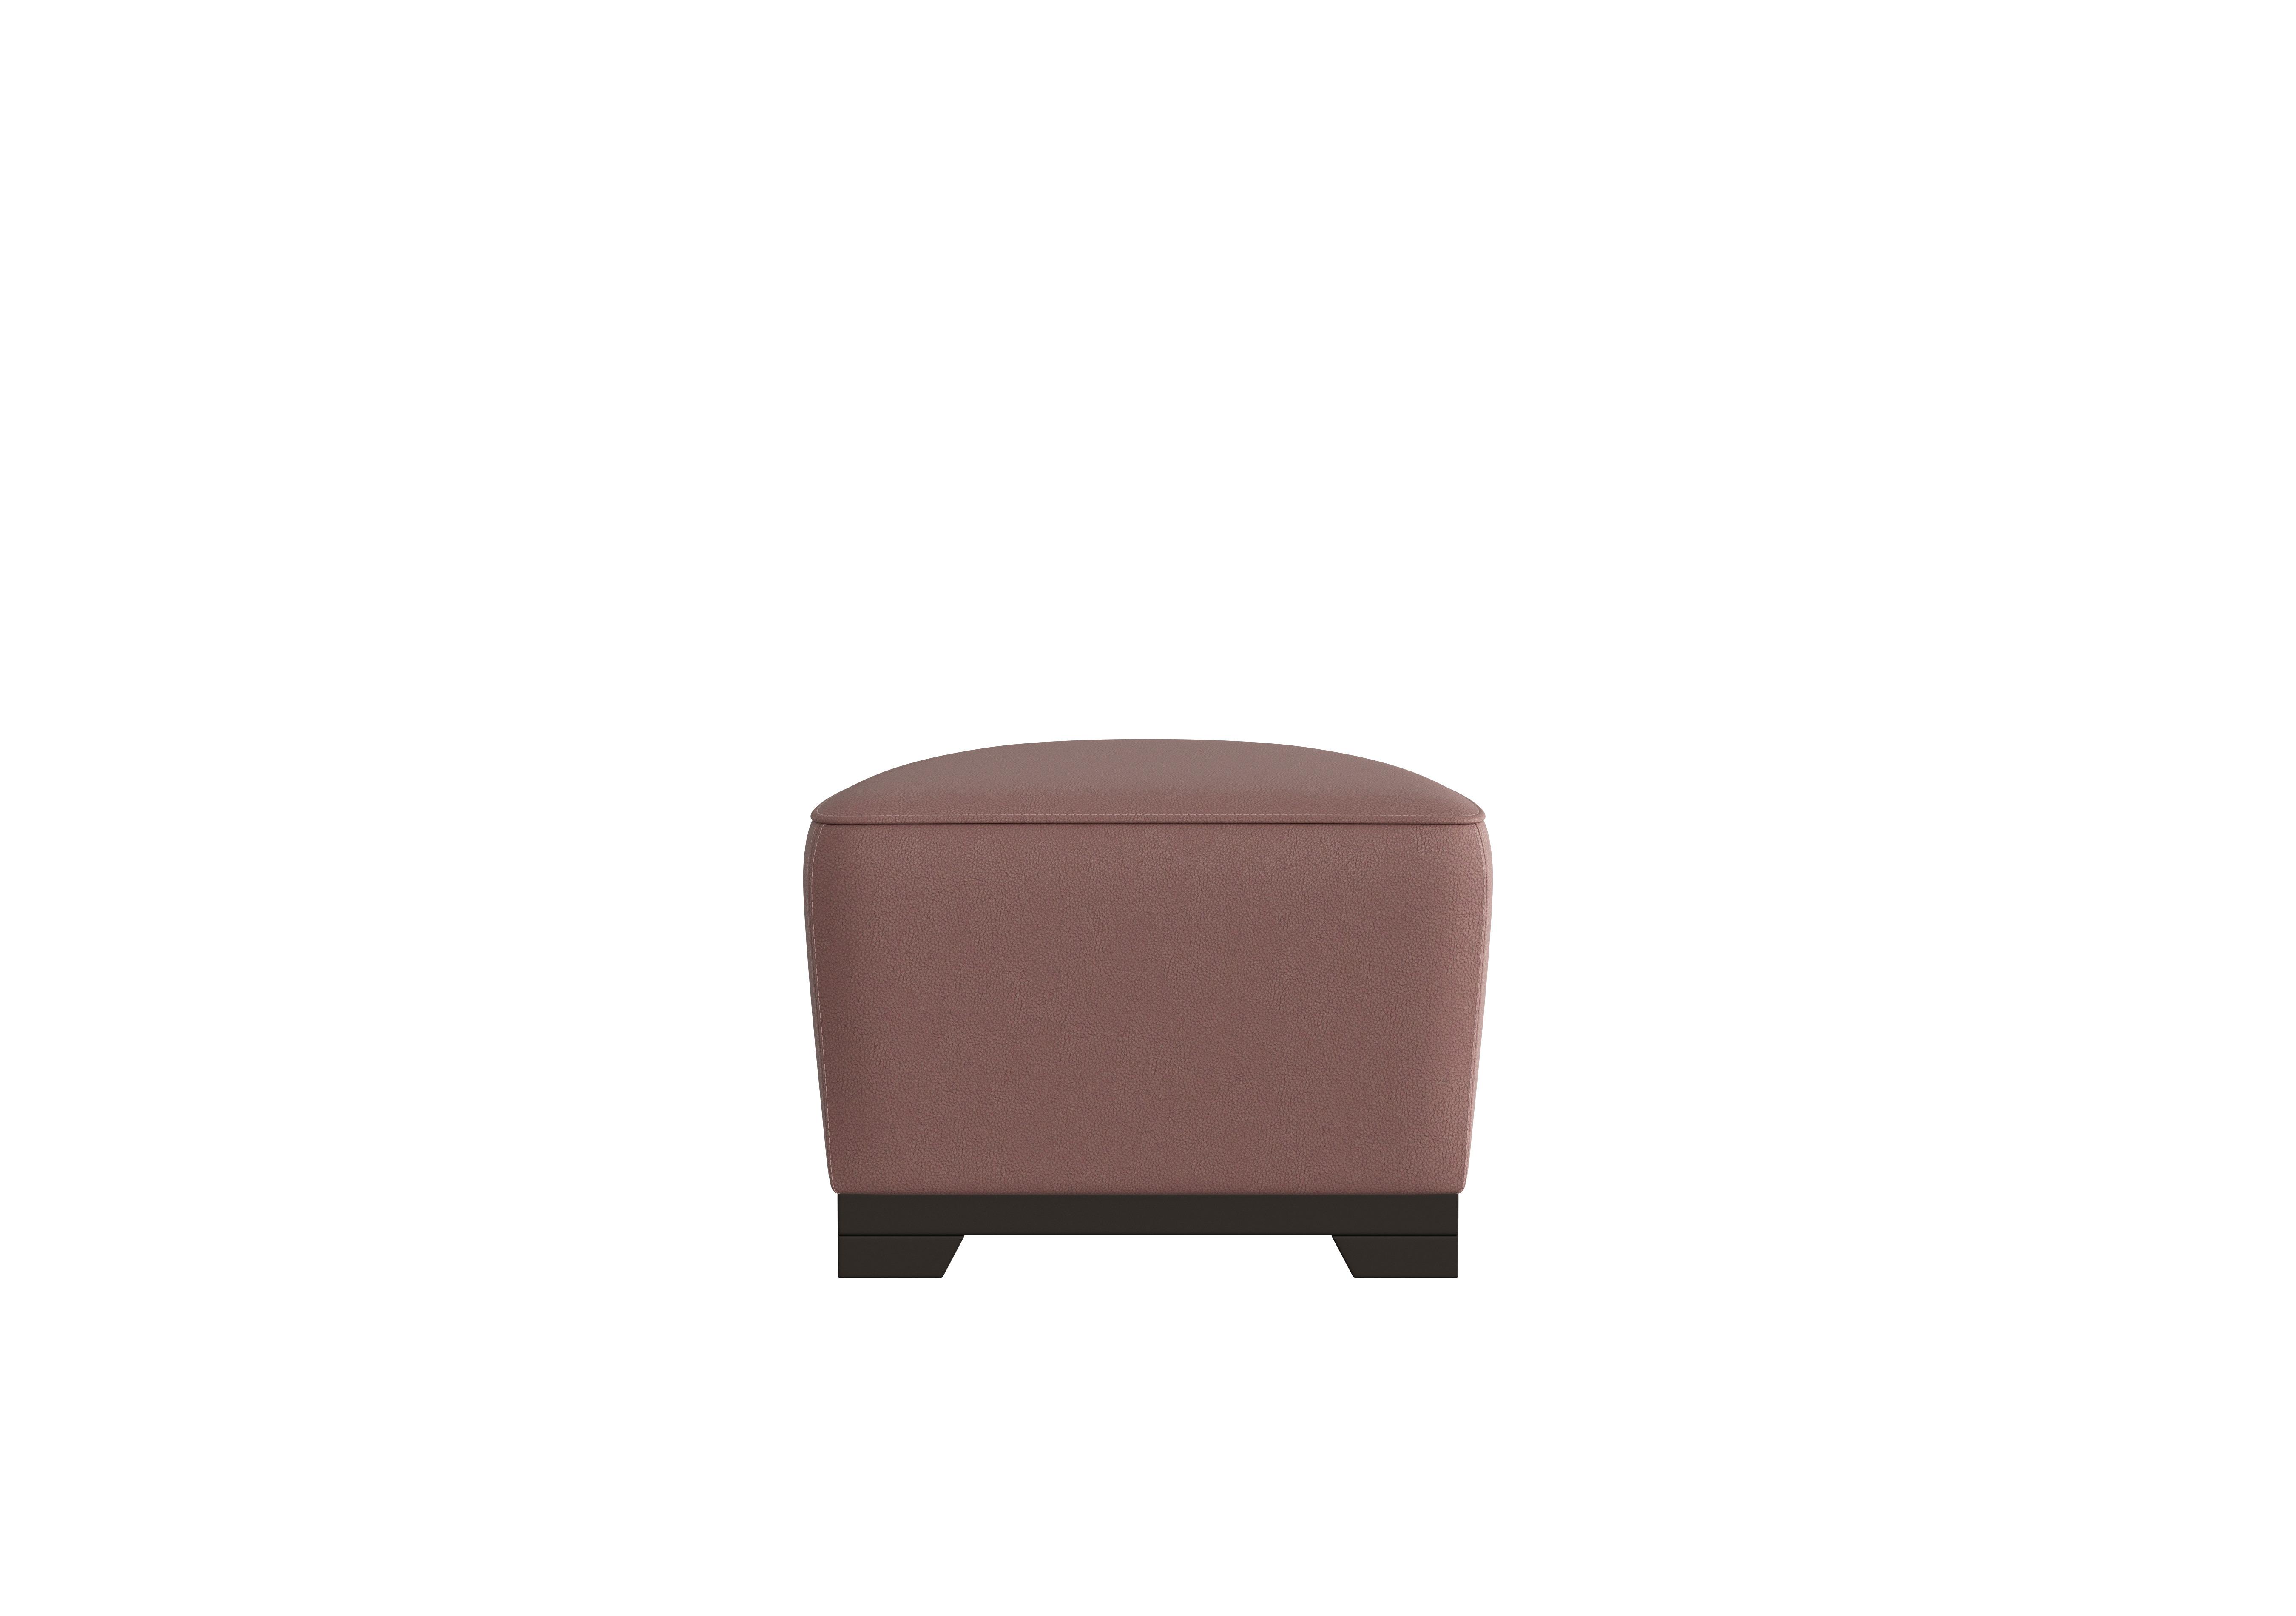 Ketty Leather D-Shaped Footstool in Botero Cipria 2160 on Furniture Village